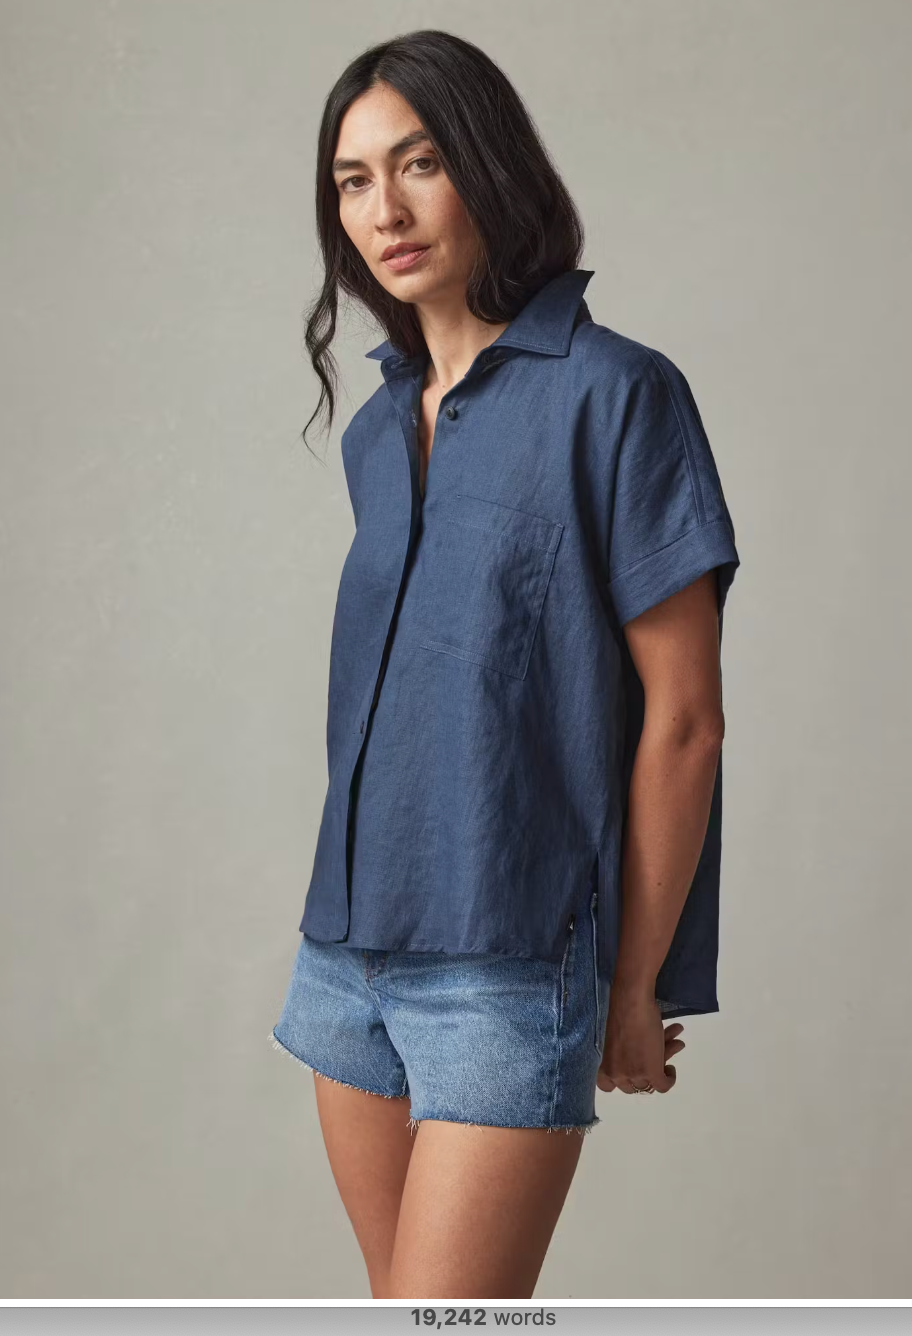 A model in a short sleeved button down and denim shorts.